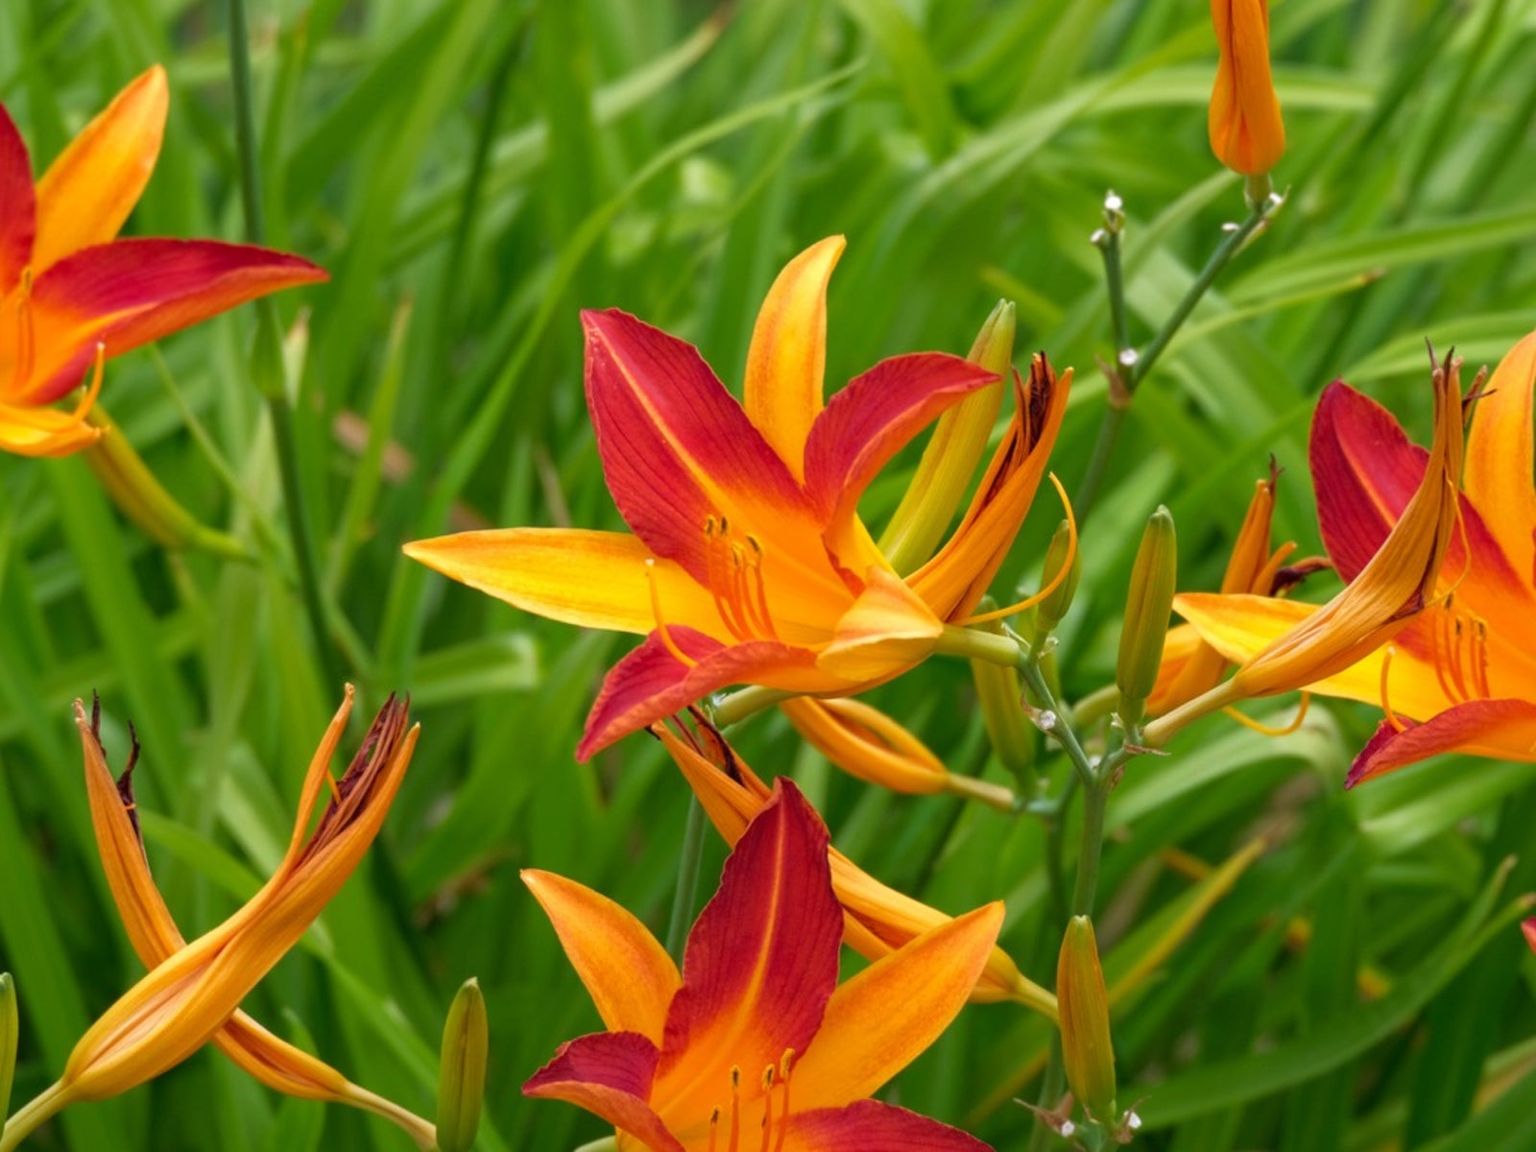 What Wildflower Has A Wavy Leaf Like An Amole But A Blossom Like A Day Lily?